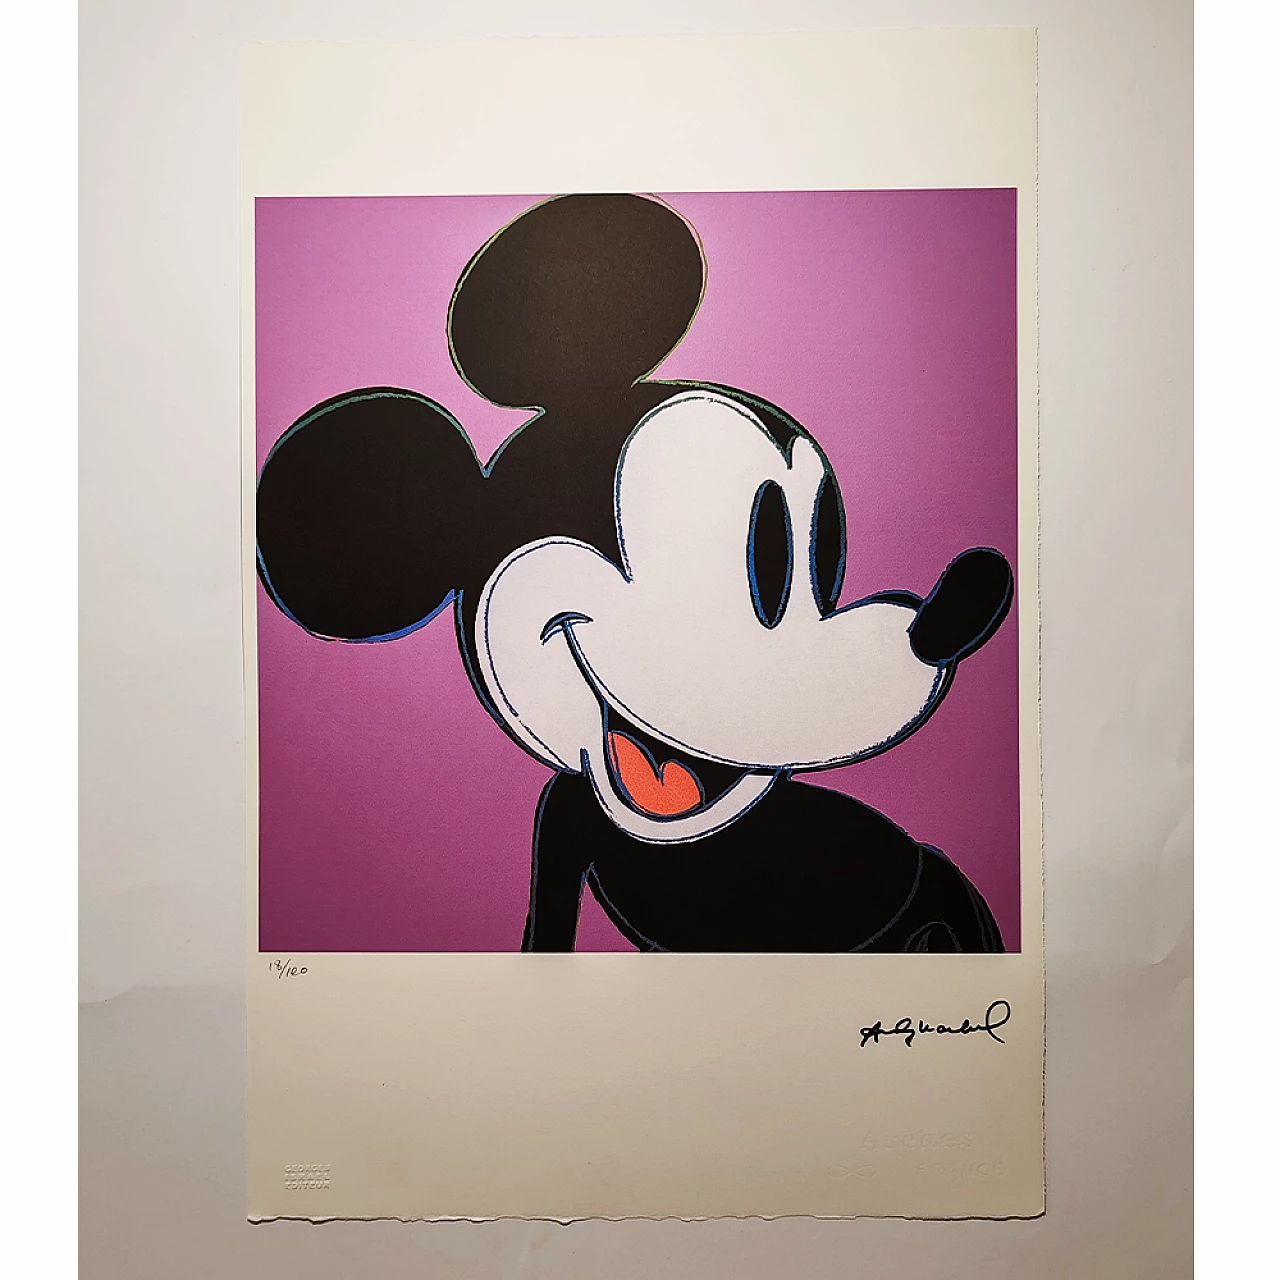 Andy Warhol, Mickey Mouse - Purple edition, lithography, 1980s 2